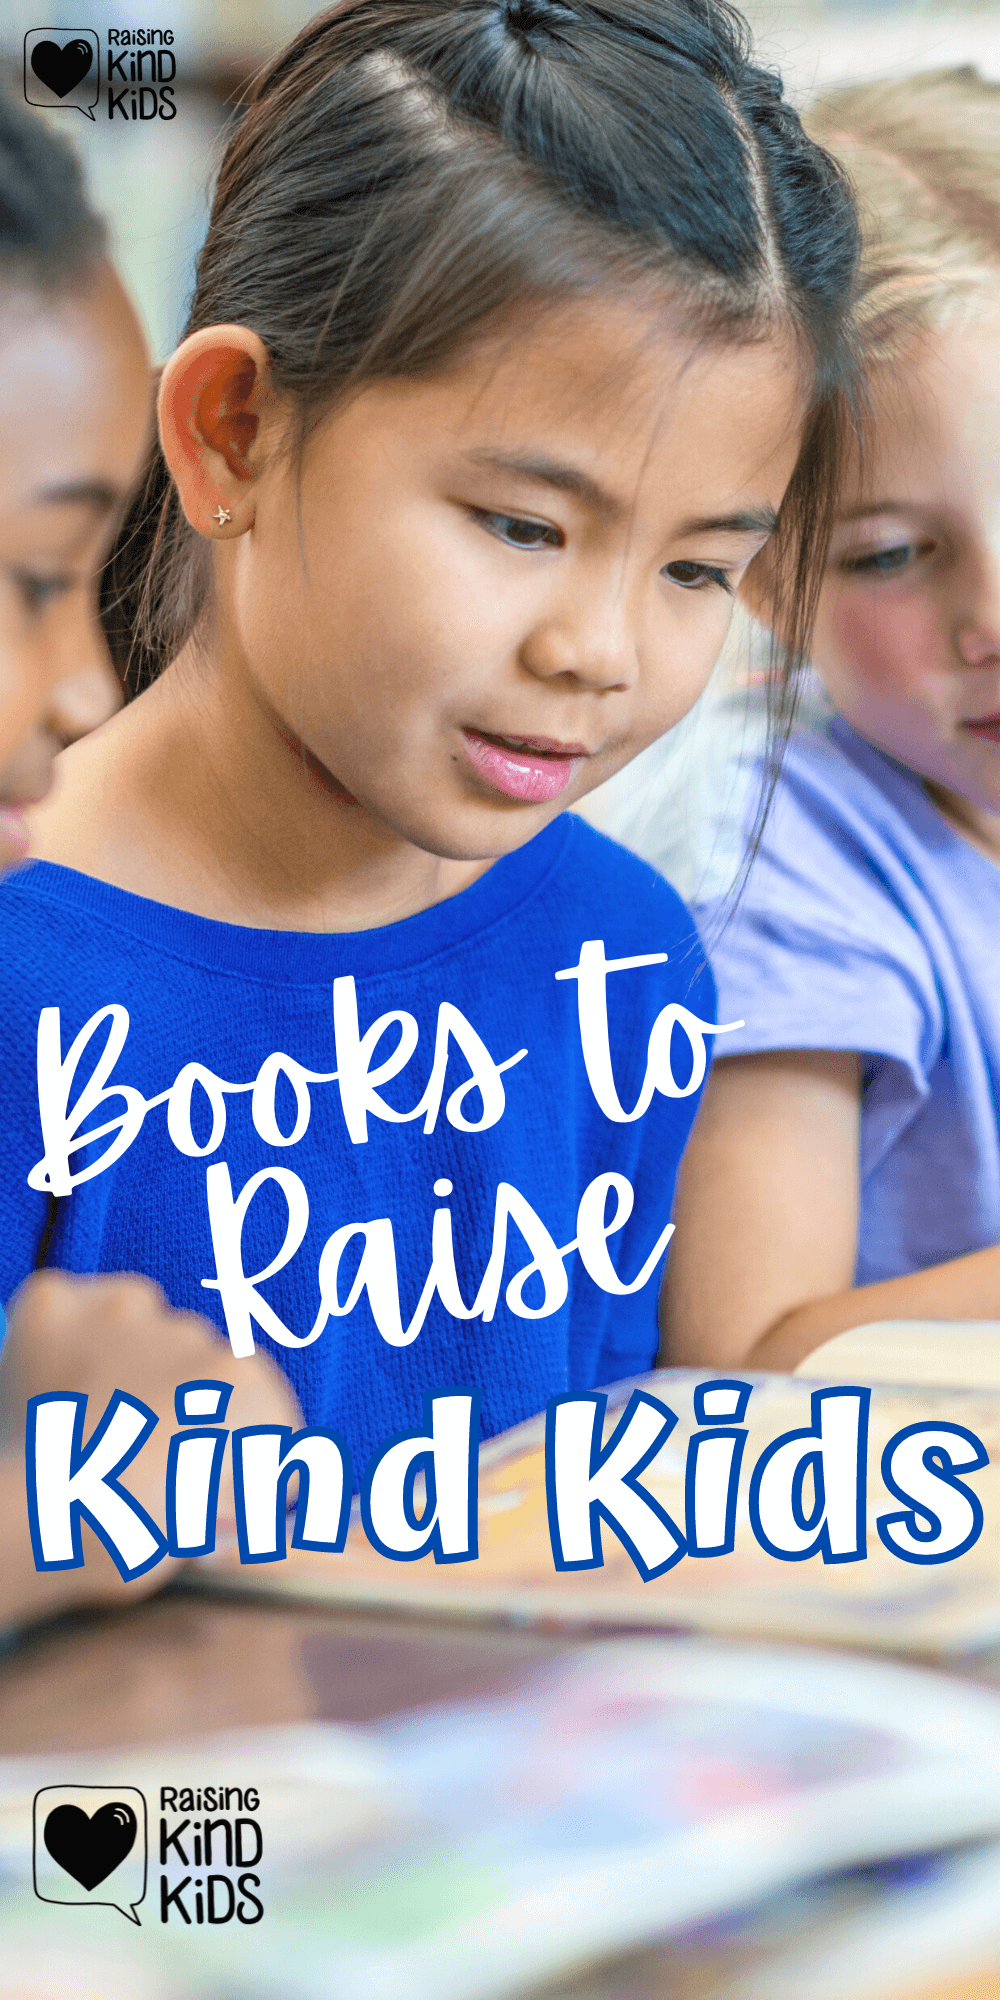 Must read books to raise kind kids. This list includes books on kindness and friendship plus discussion starters to help kids understand what makes a good friend. #booklist #kidsbooks #books #kindkids #raisingkindkids #bekind #friendshipbooks #beagoodfriend #teachingkindness #coffeeandcarpool